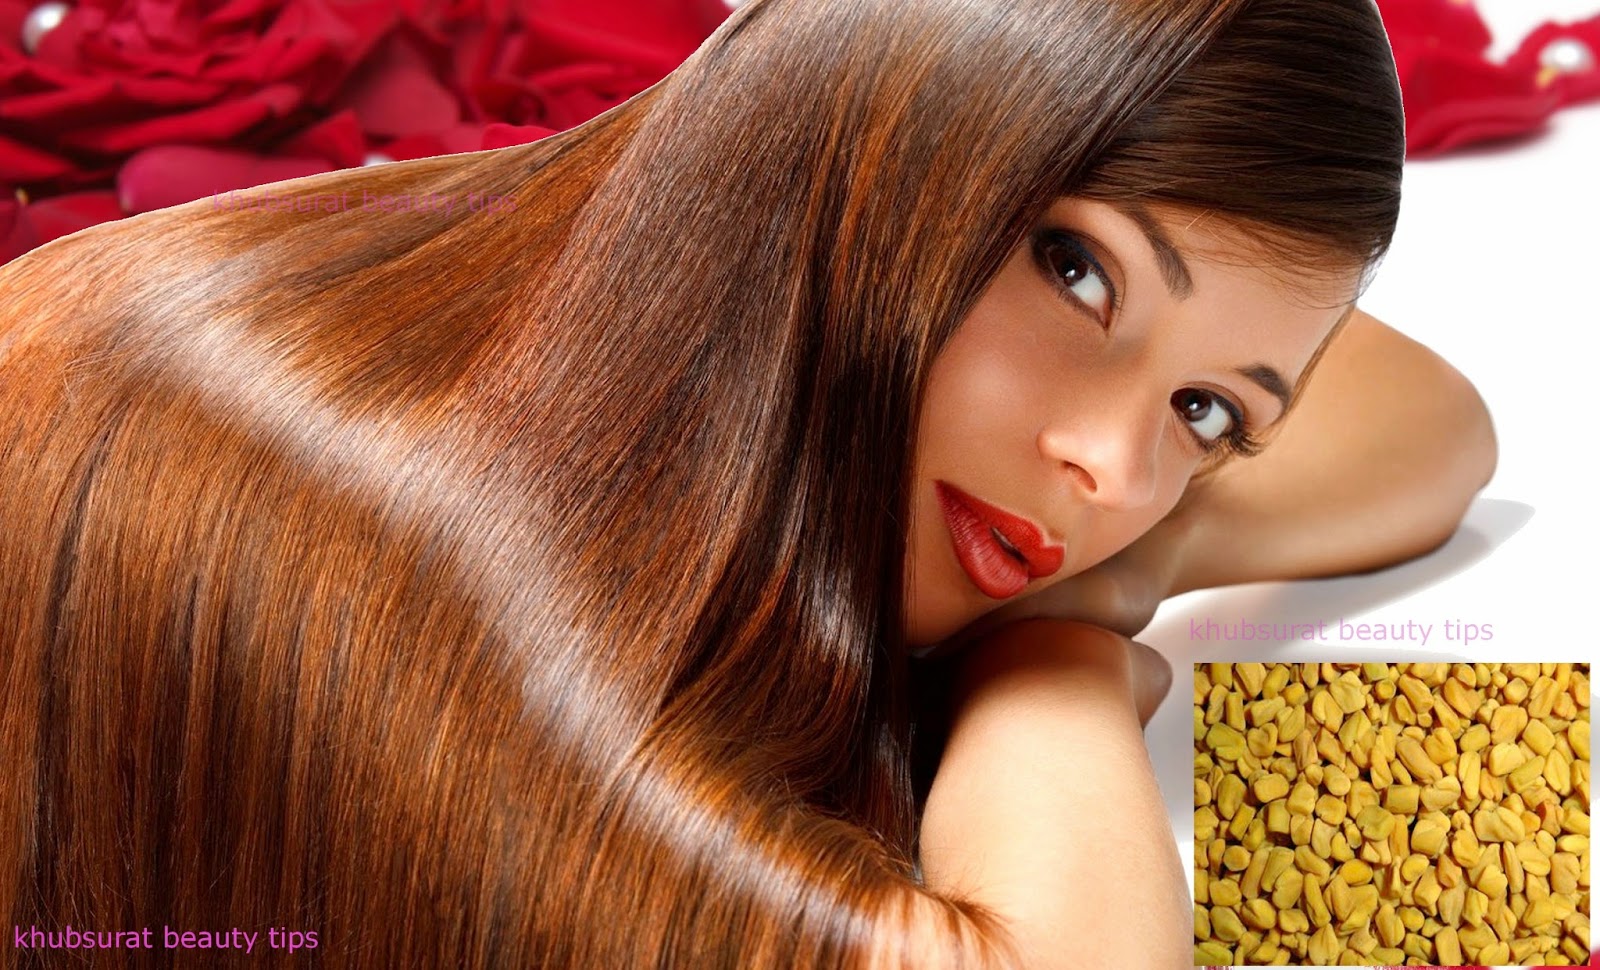 Khubsurat Beauty Tips Faster Hair Growth Tips With Methi Seeds